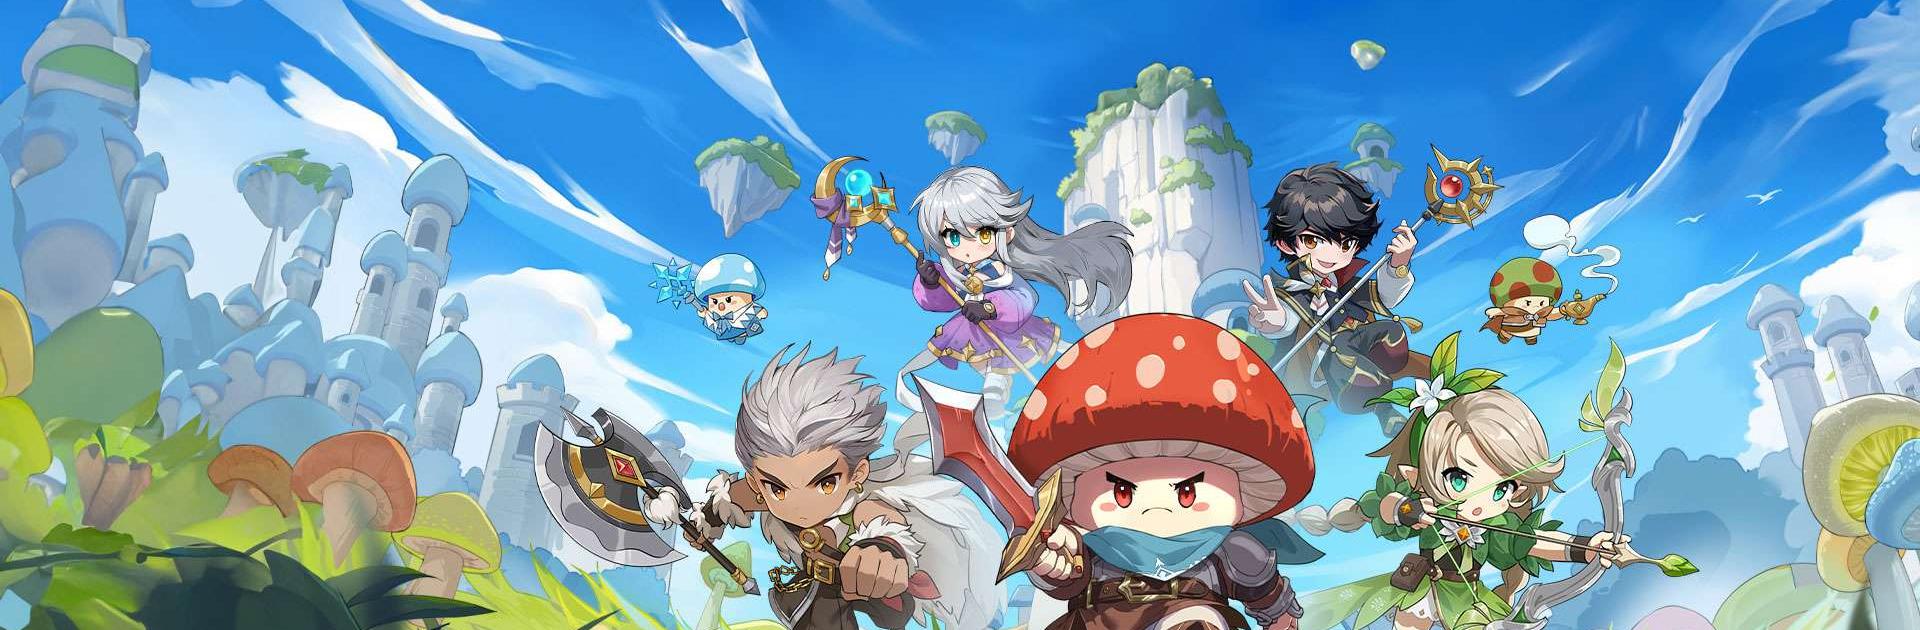 Legend of Mushroom Latest Update: New Marriage Feature & Spring Journey Event!